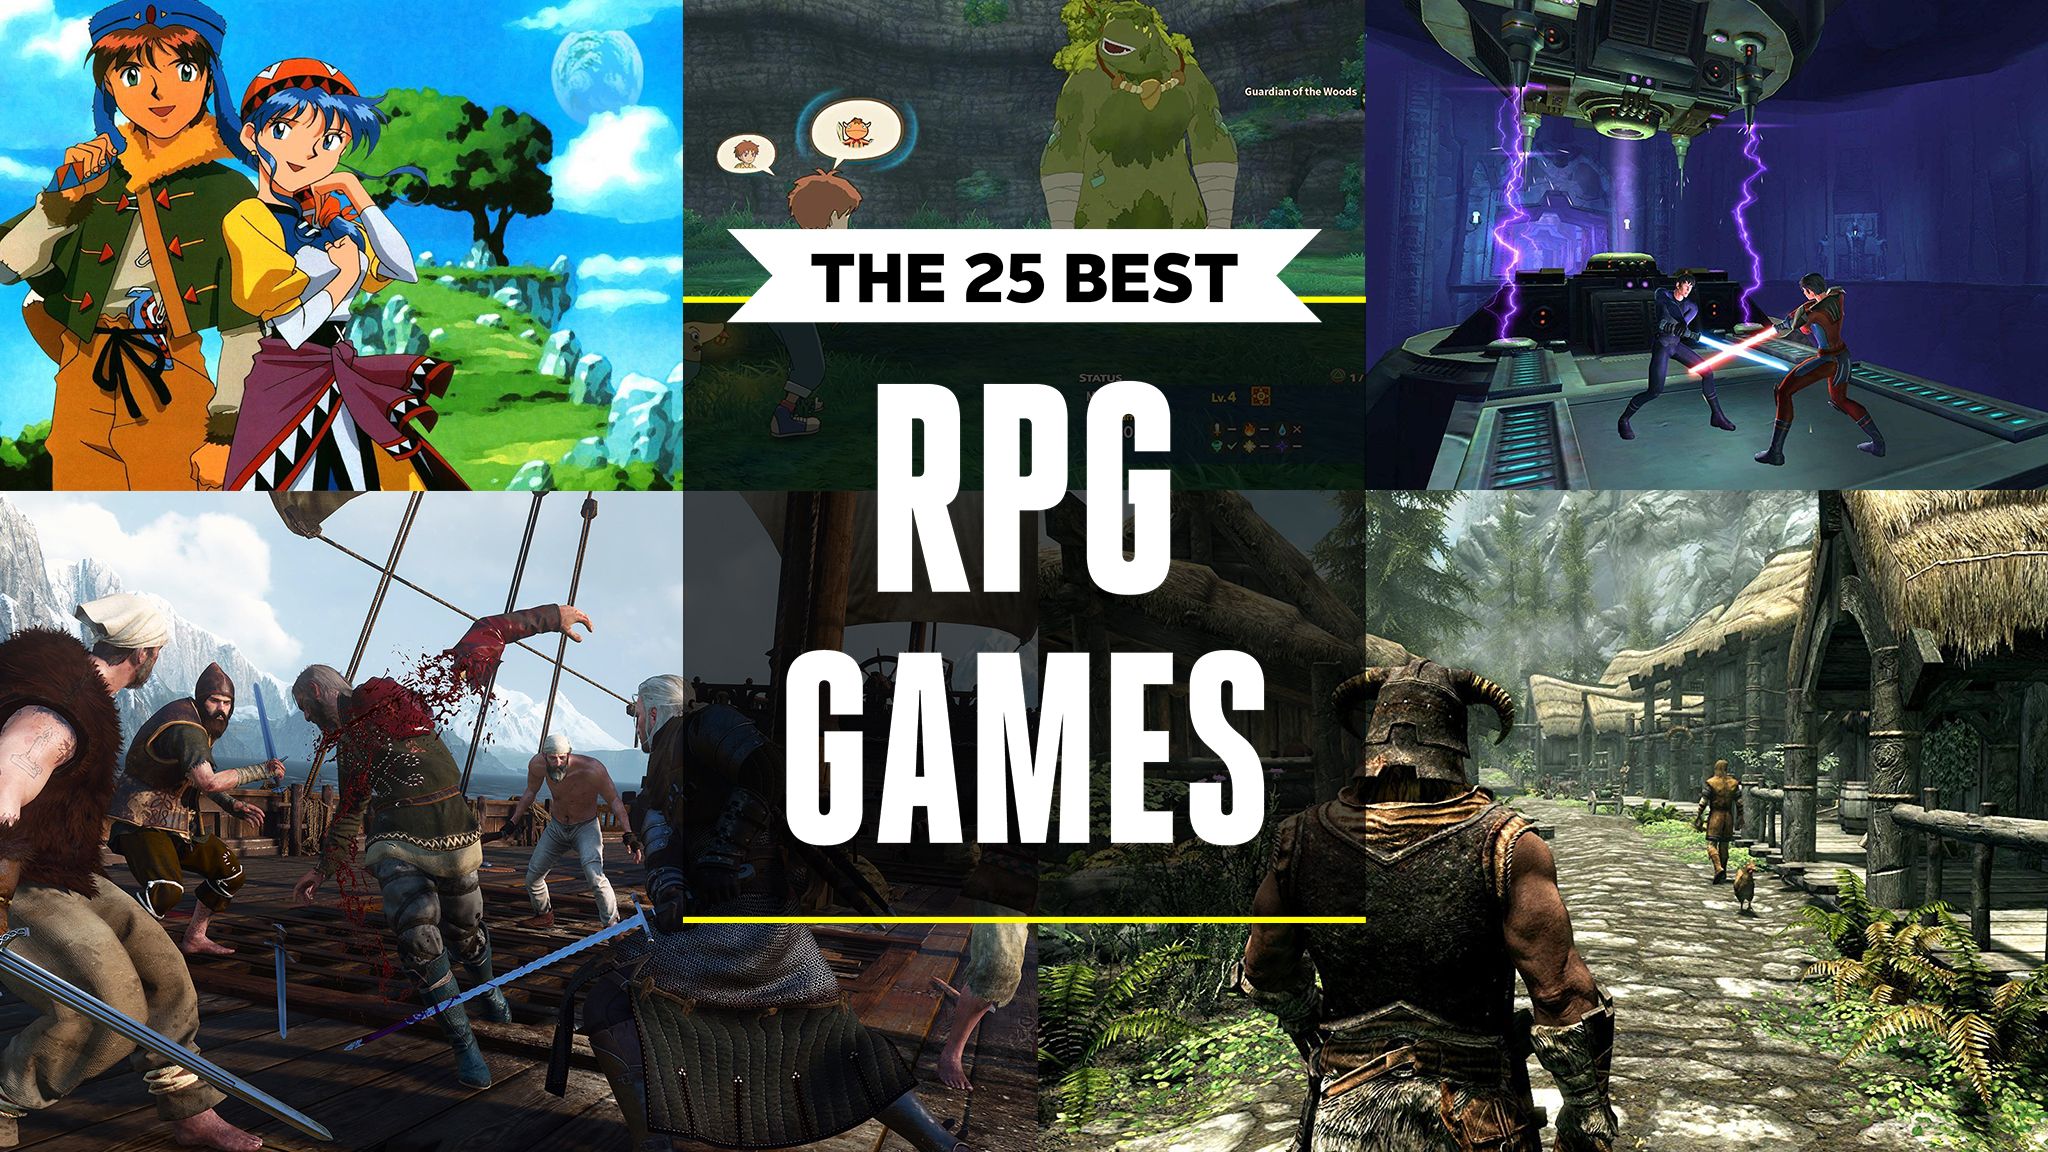 The 25 best games of 2019